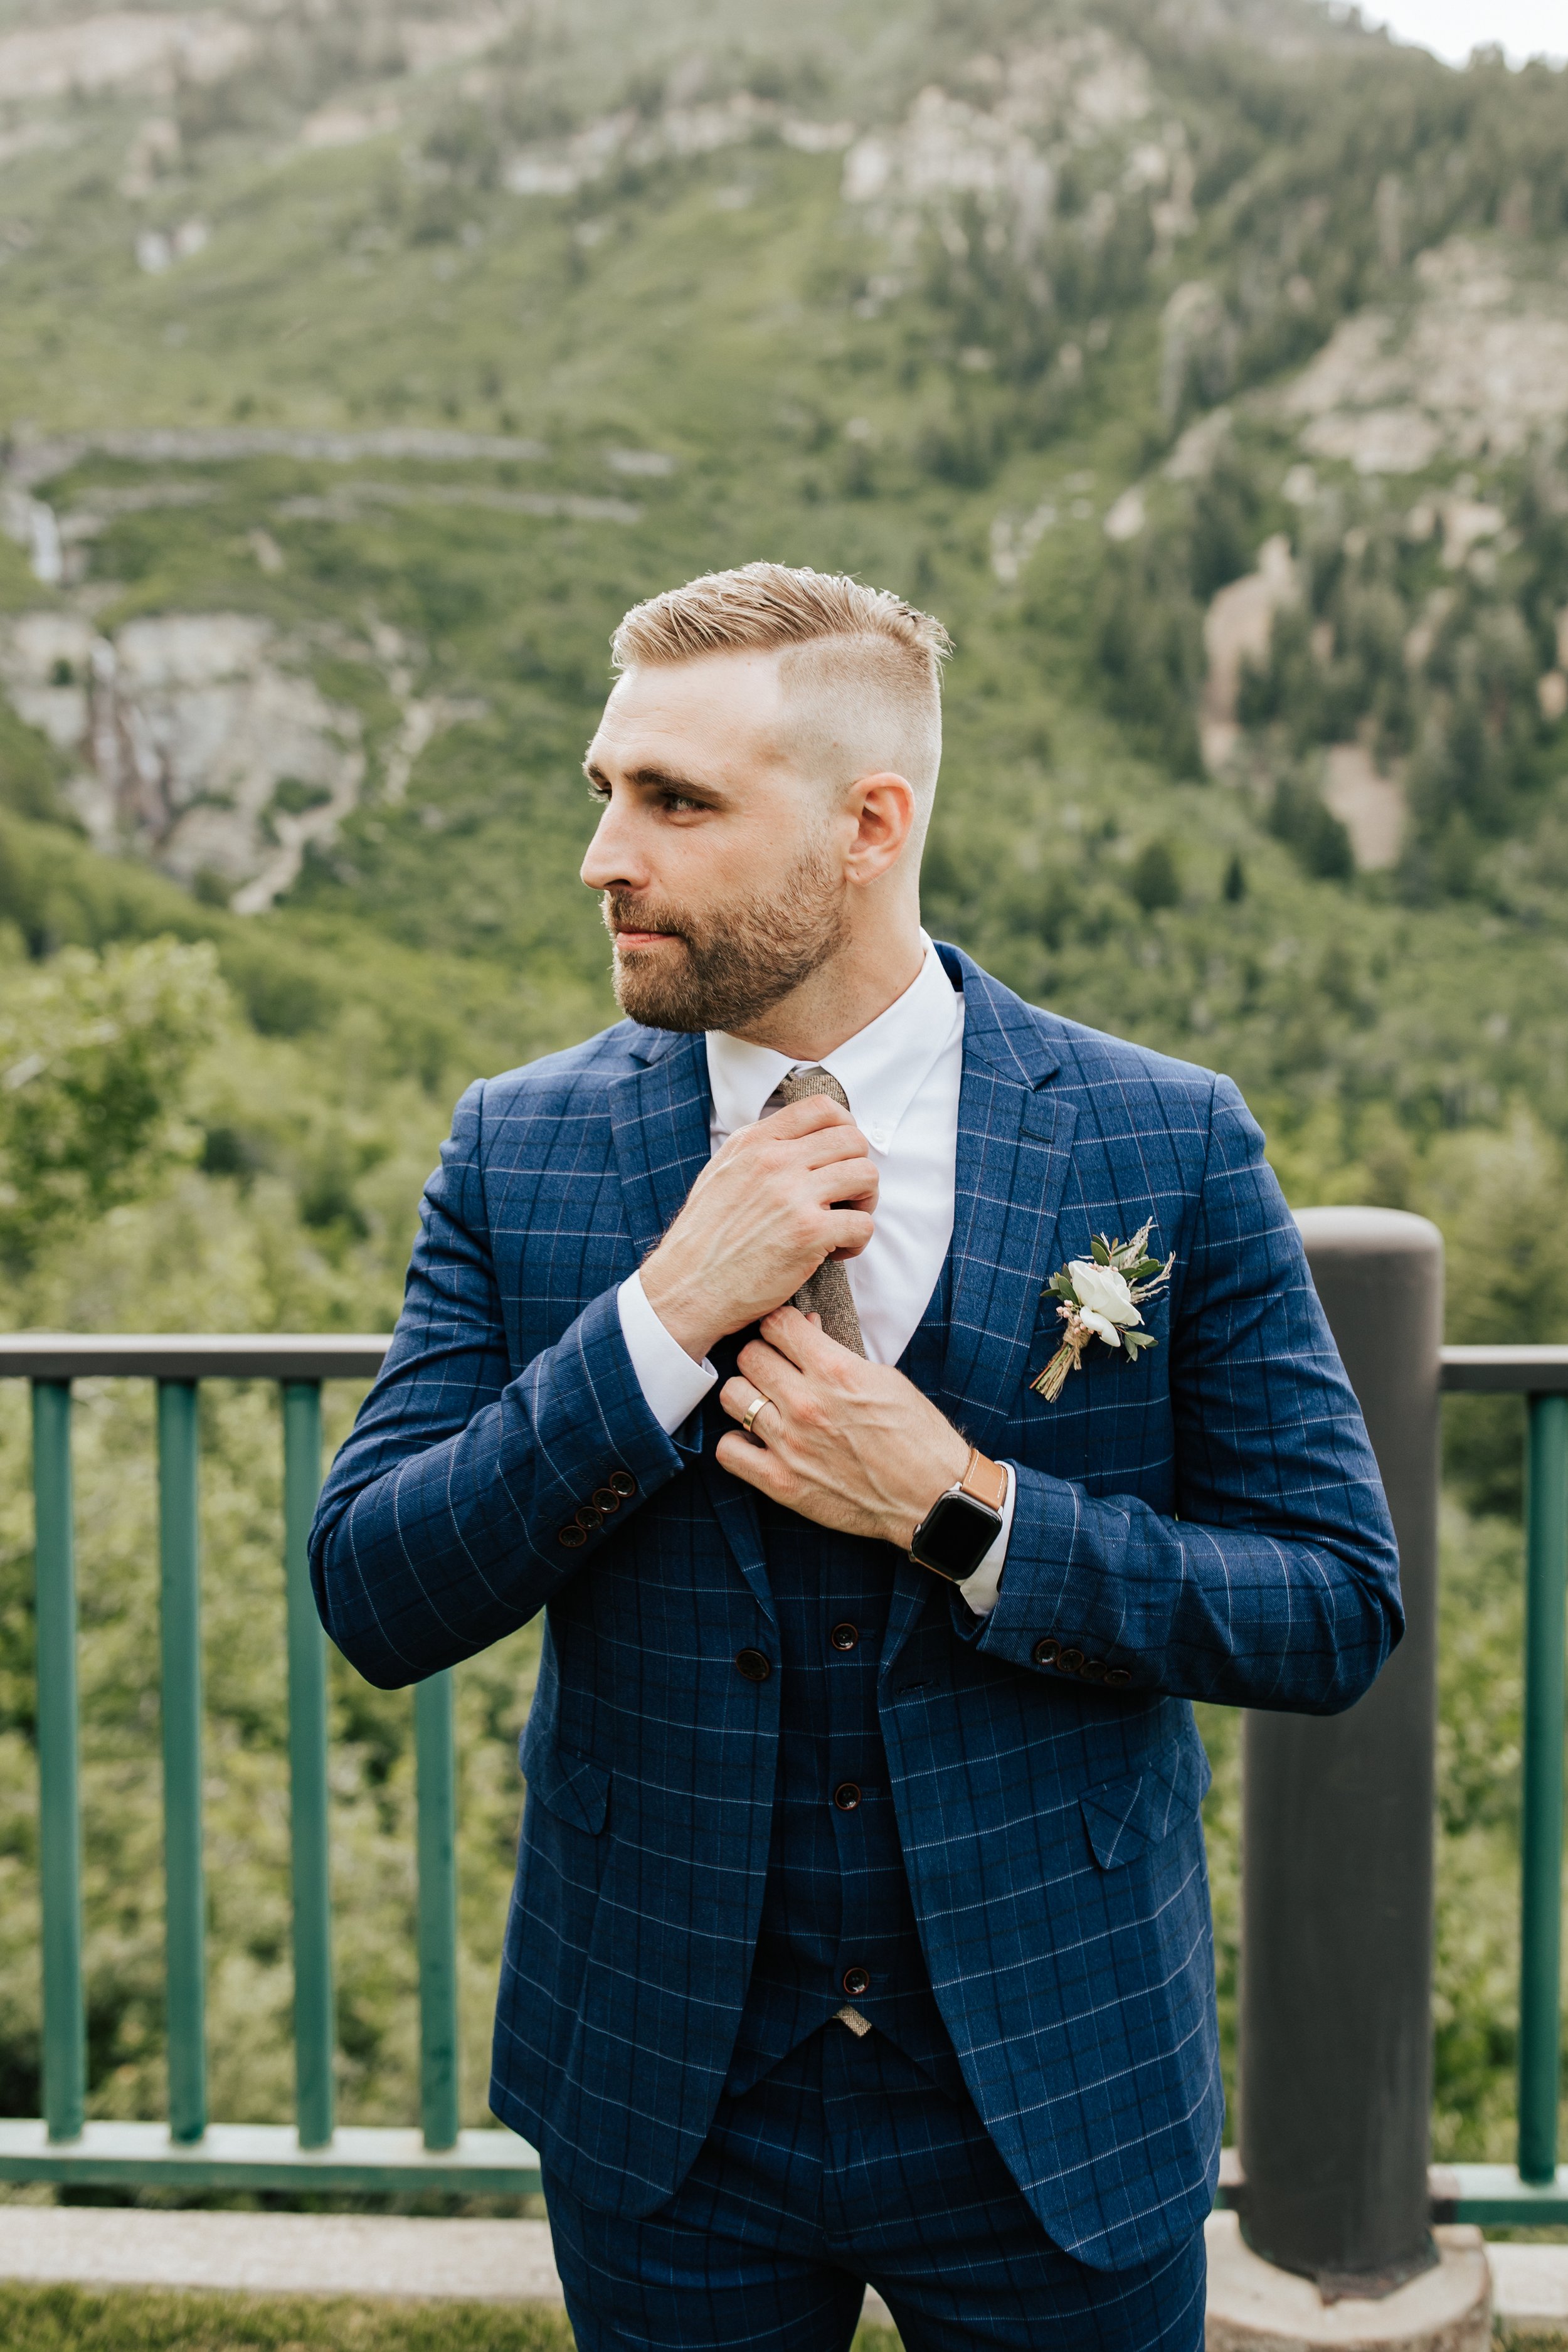  Groom adjusting tie after getting married. Groom wears a striped navy blue suit, a watch, and a corsage. #weddingphotos #weddingphotographer #utahwedding 